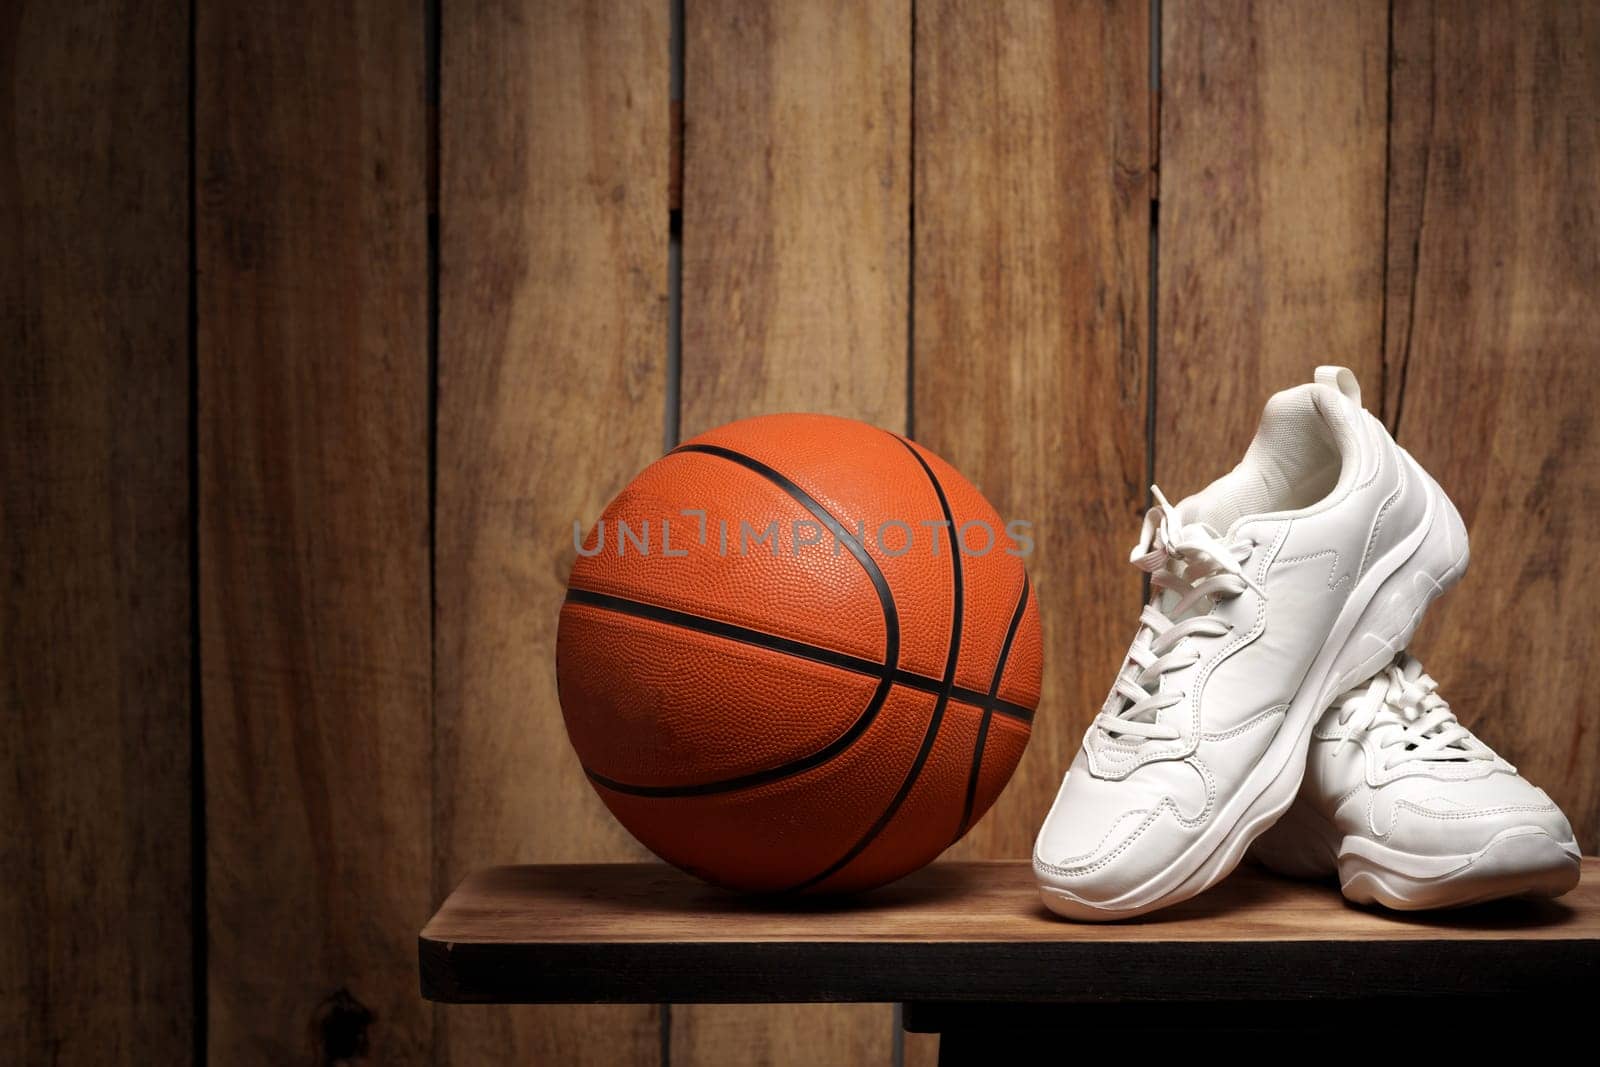 White sneakers and basketball ball against wooden background close up